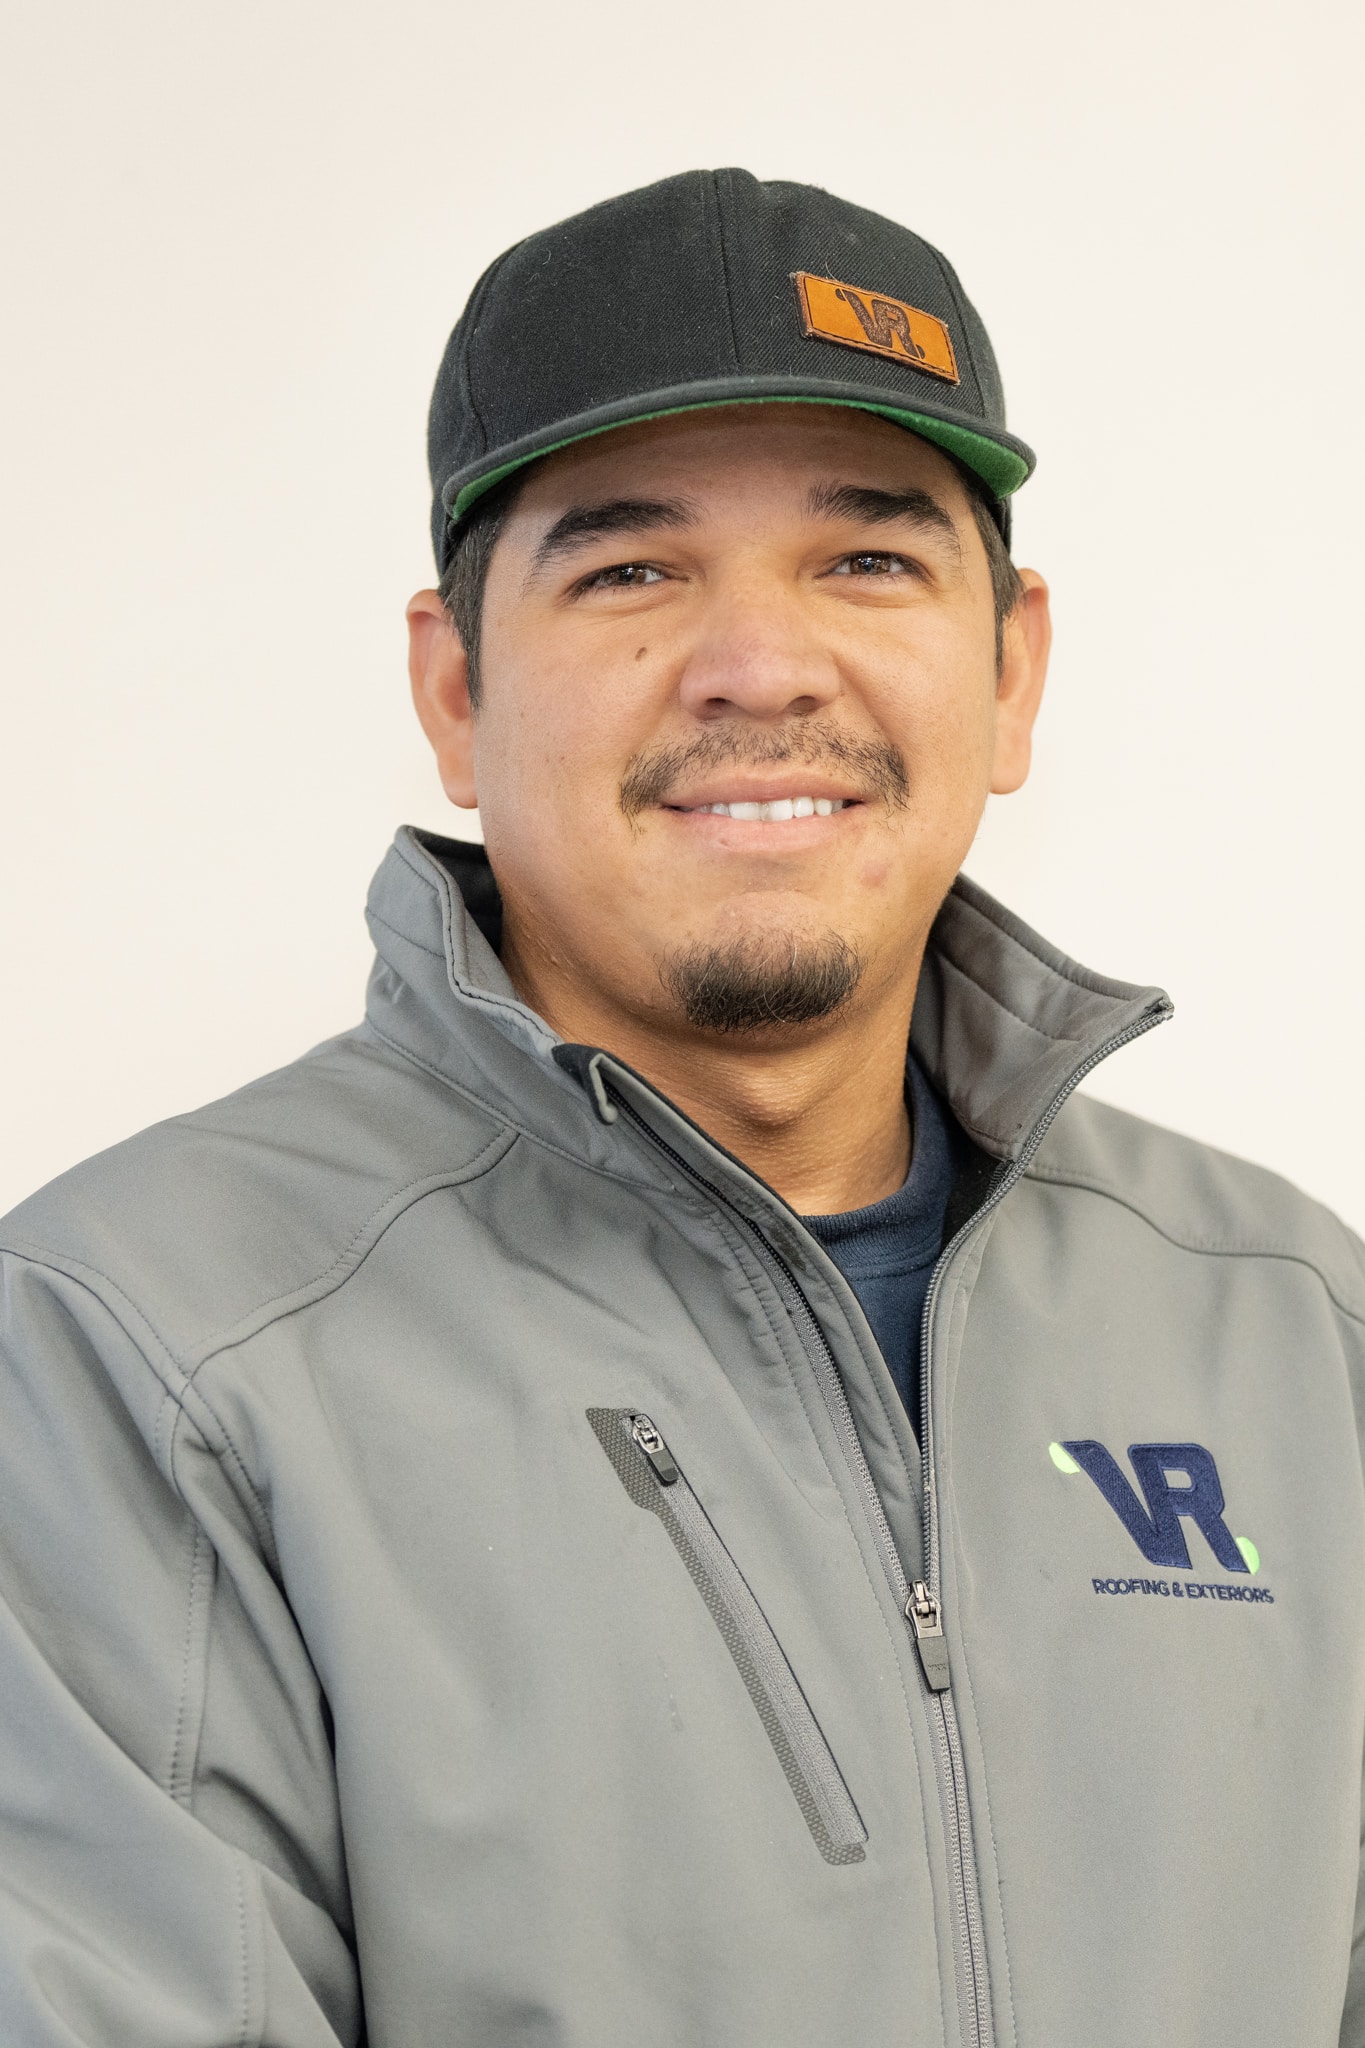 Headshot of Esteban Aquilar, Metal Roofing Project Manager at Valley Roofing & Exteriors.